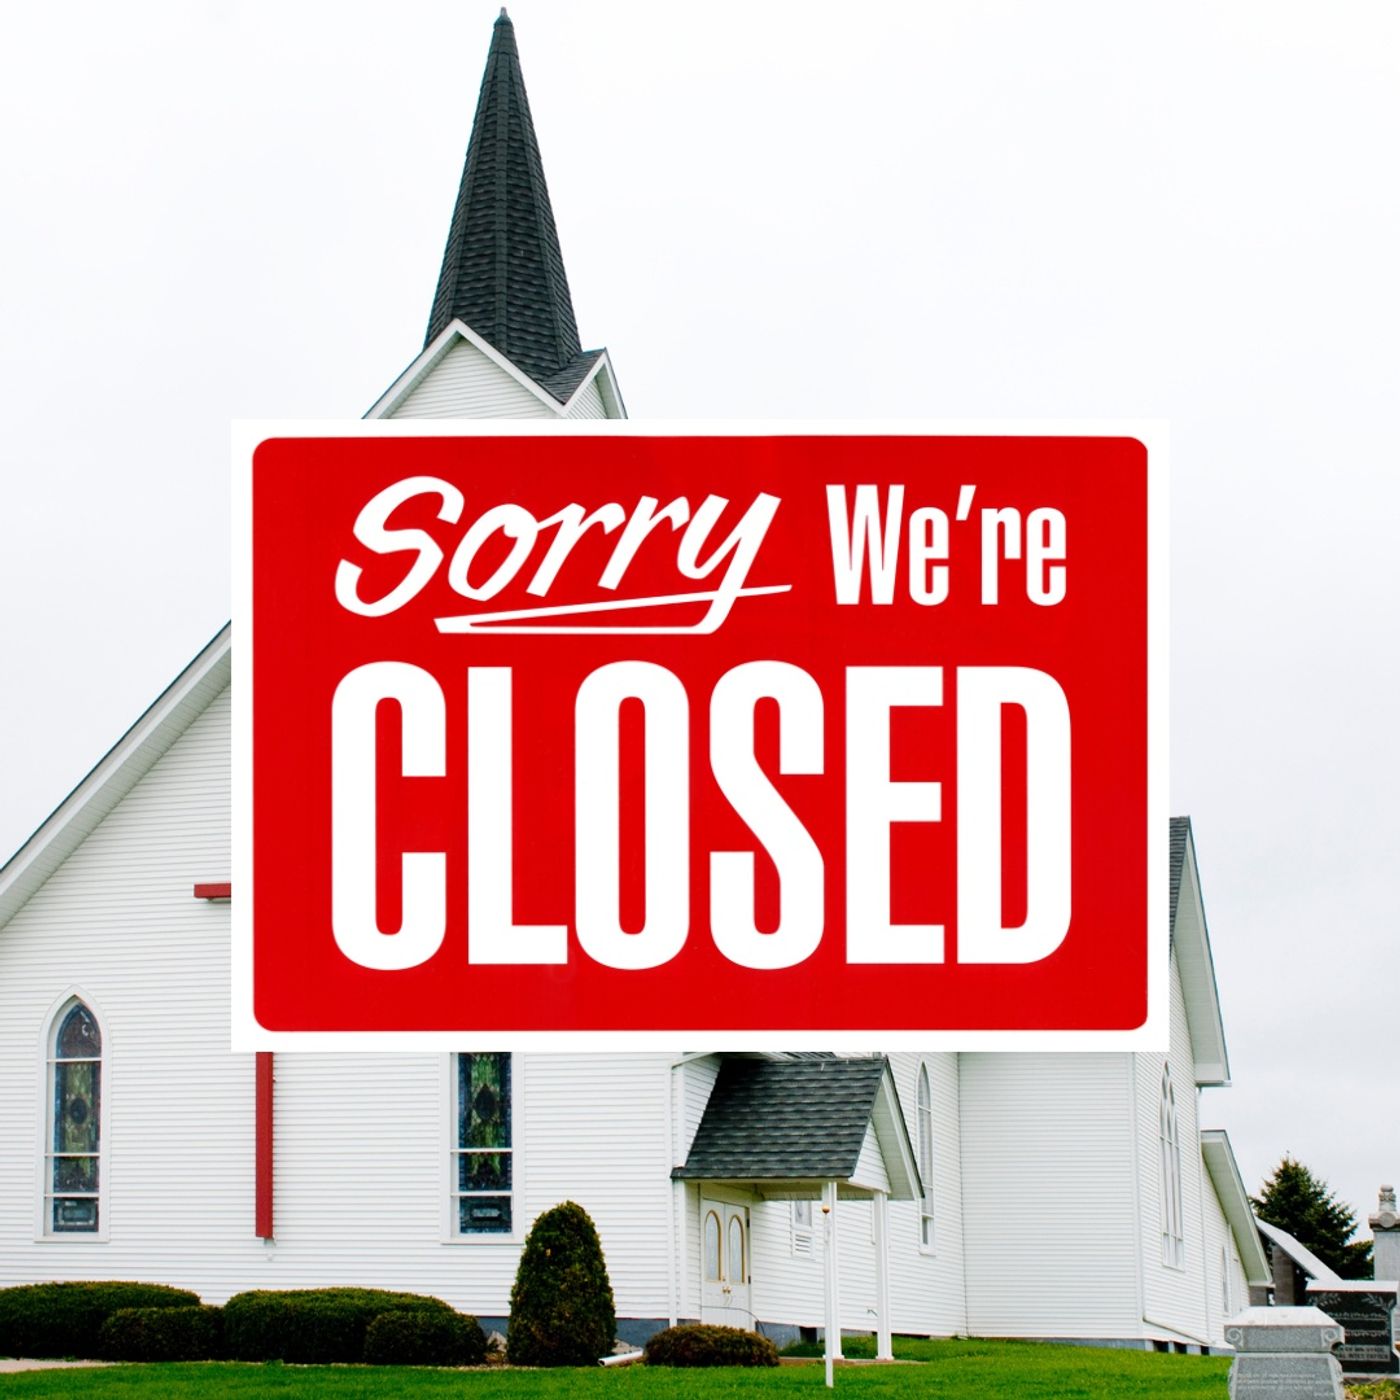 Churches Are Shutting Down and That's a Good Thing